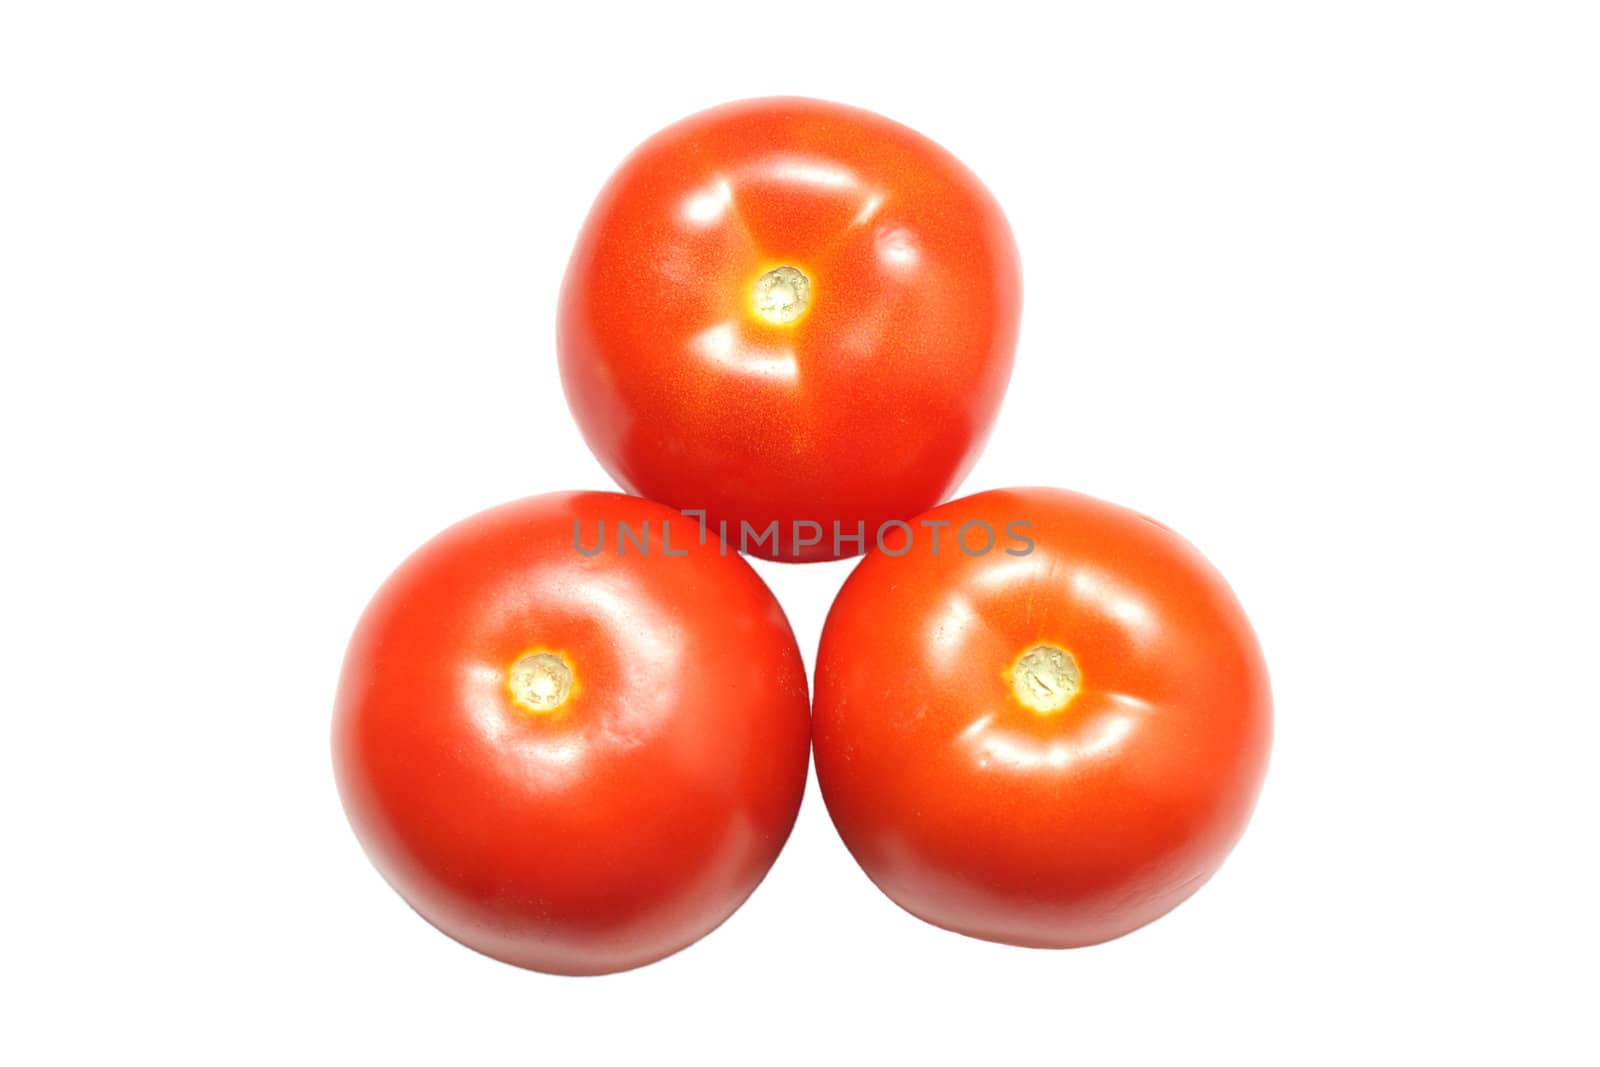 Three red ripe tomatoes isolated on white background